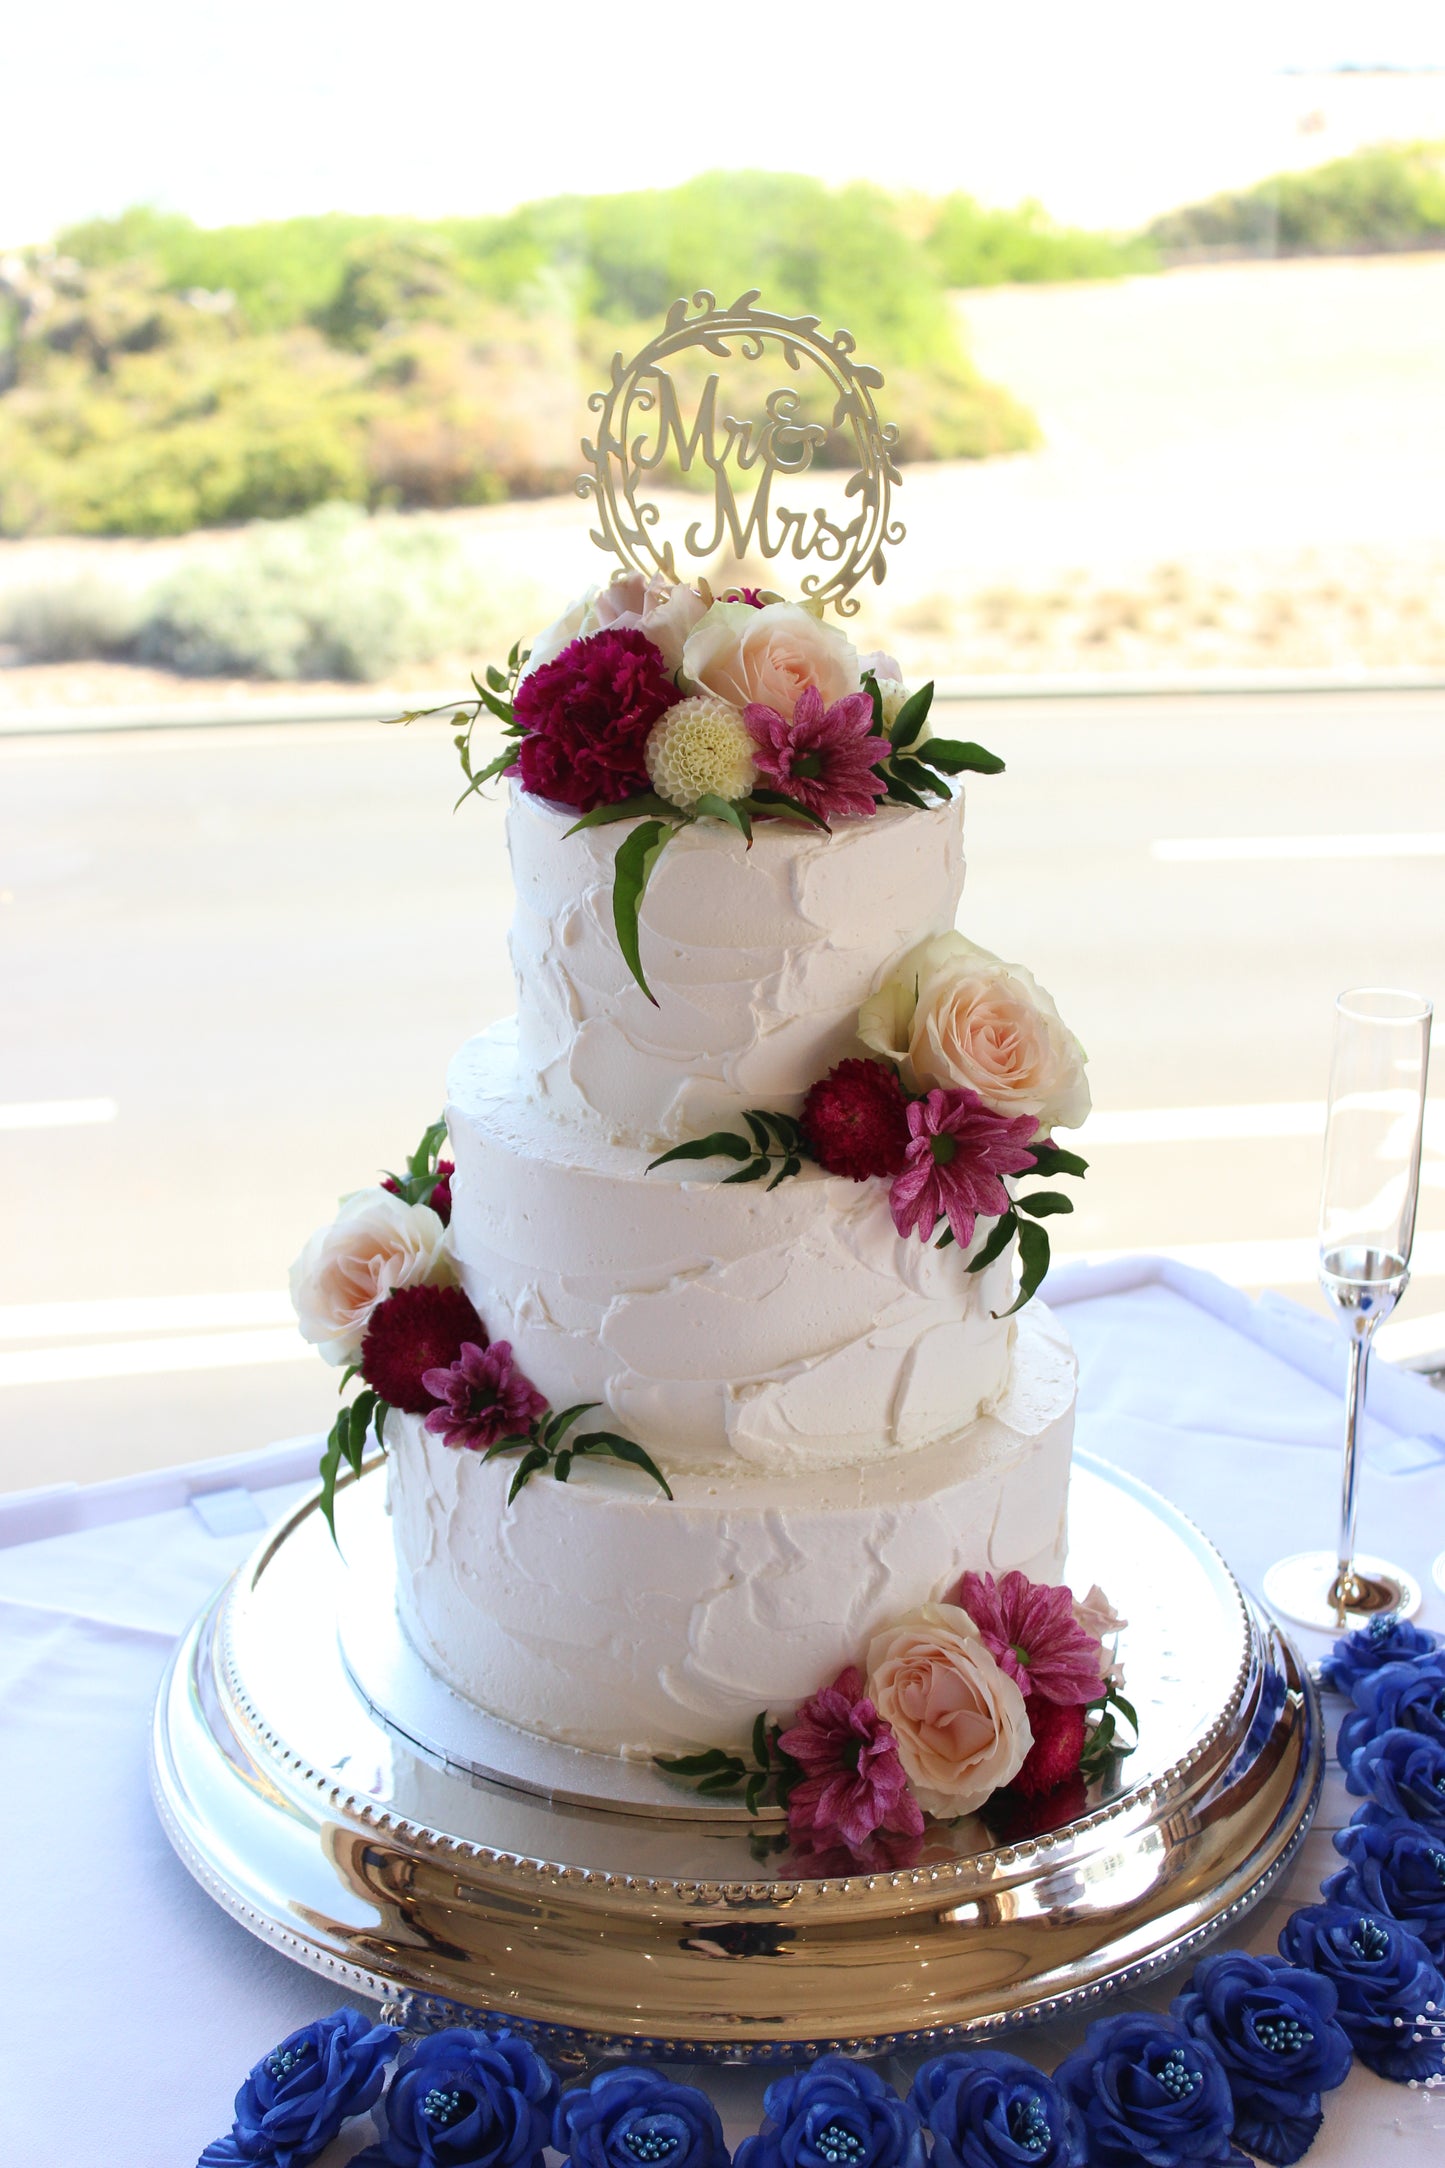 3 Tier Rough Buttercream with Bright Flowers